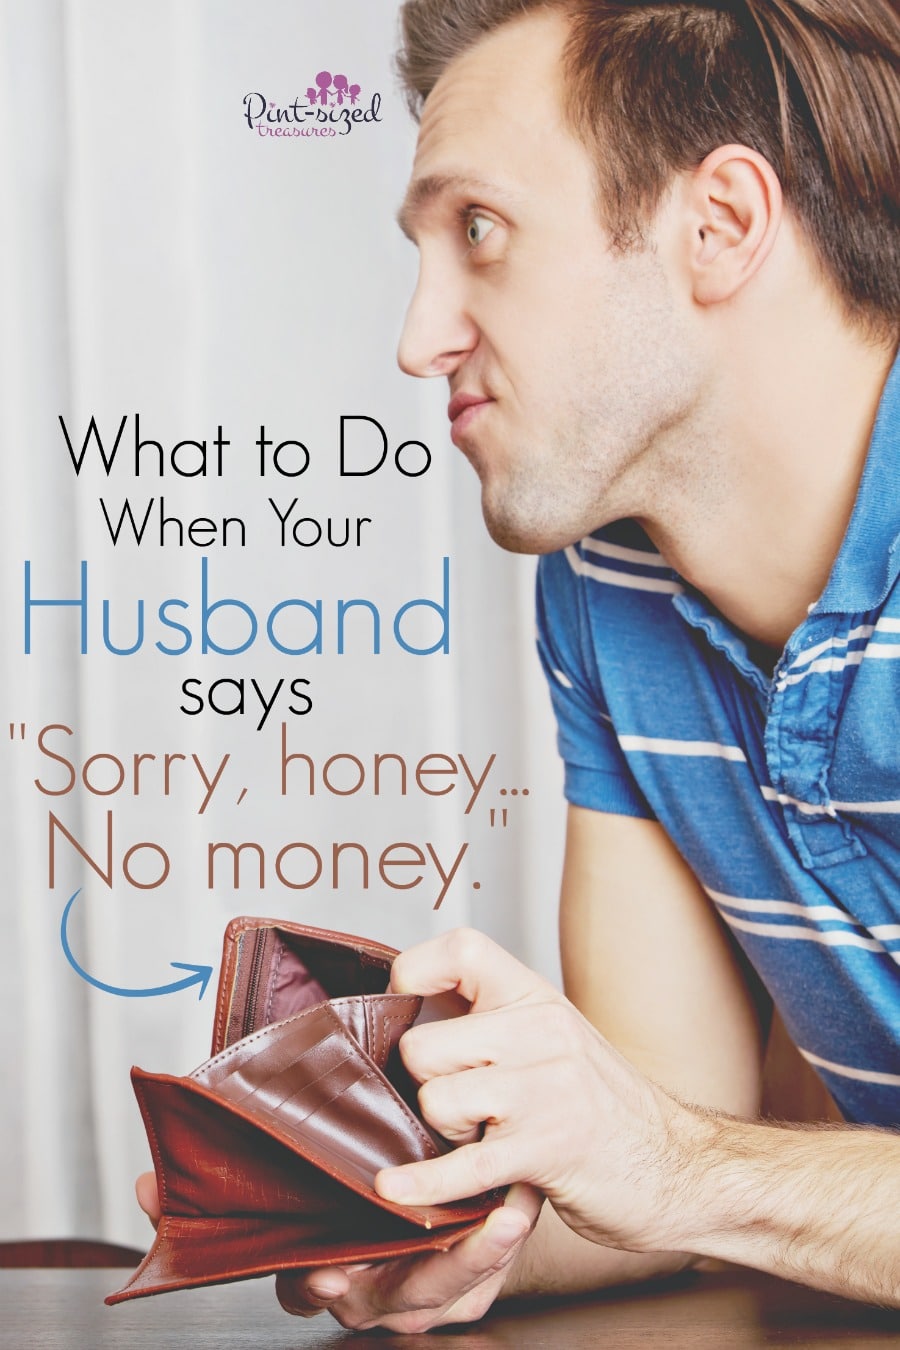 when your husband says sorry honey no money